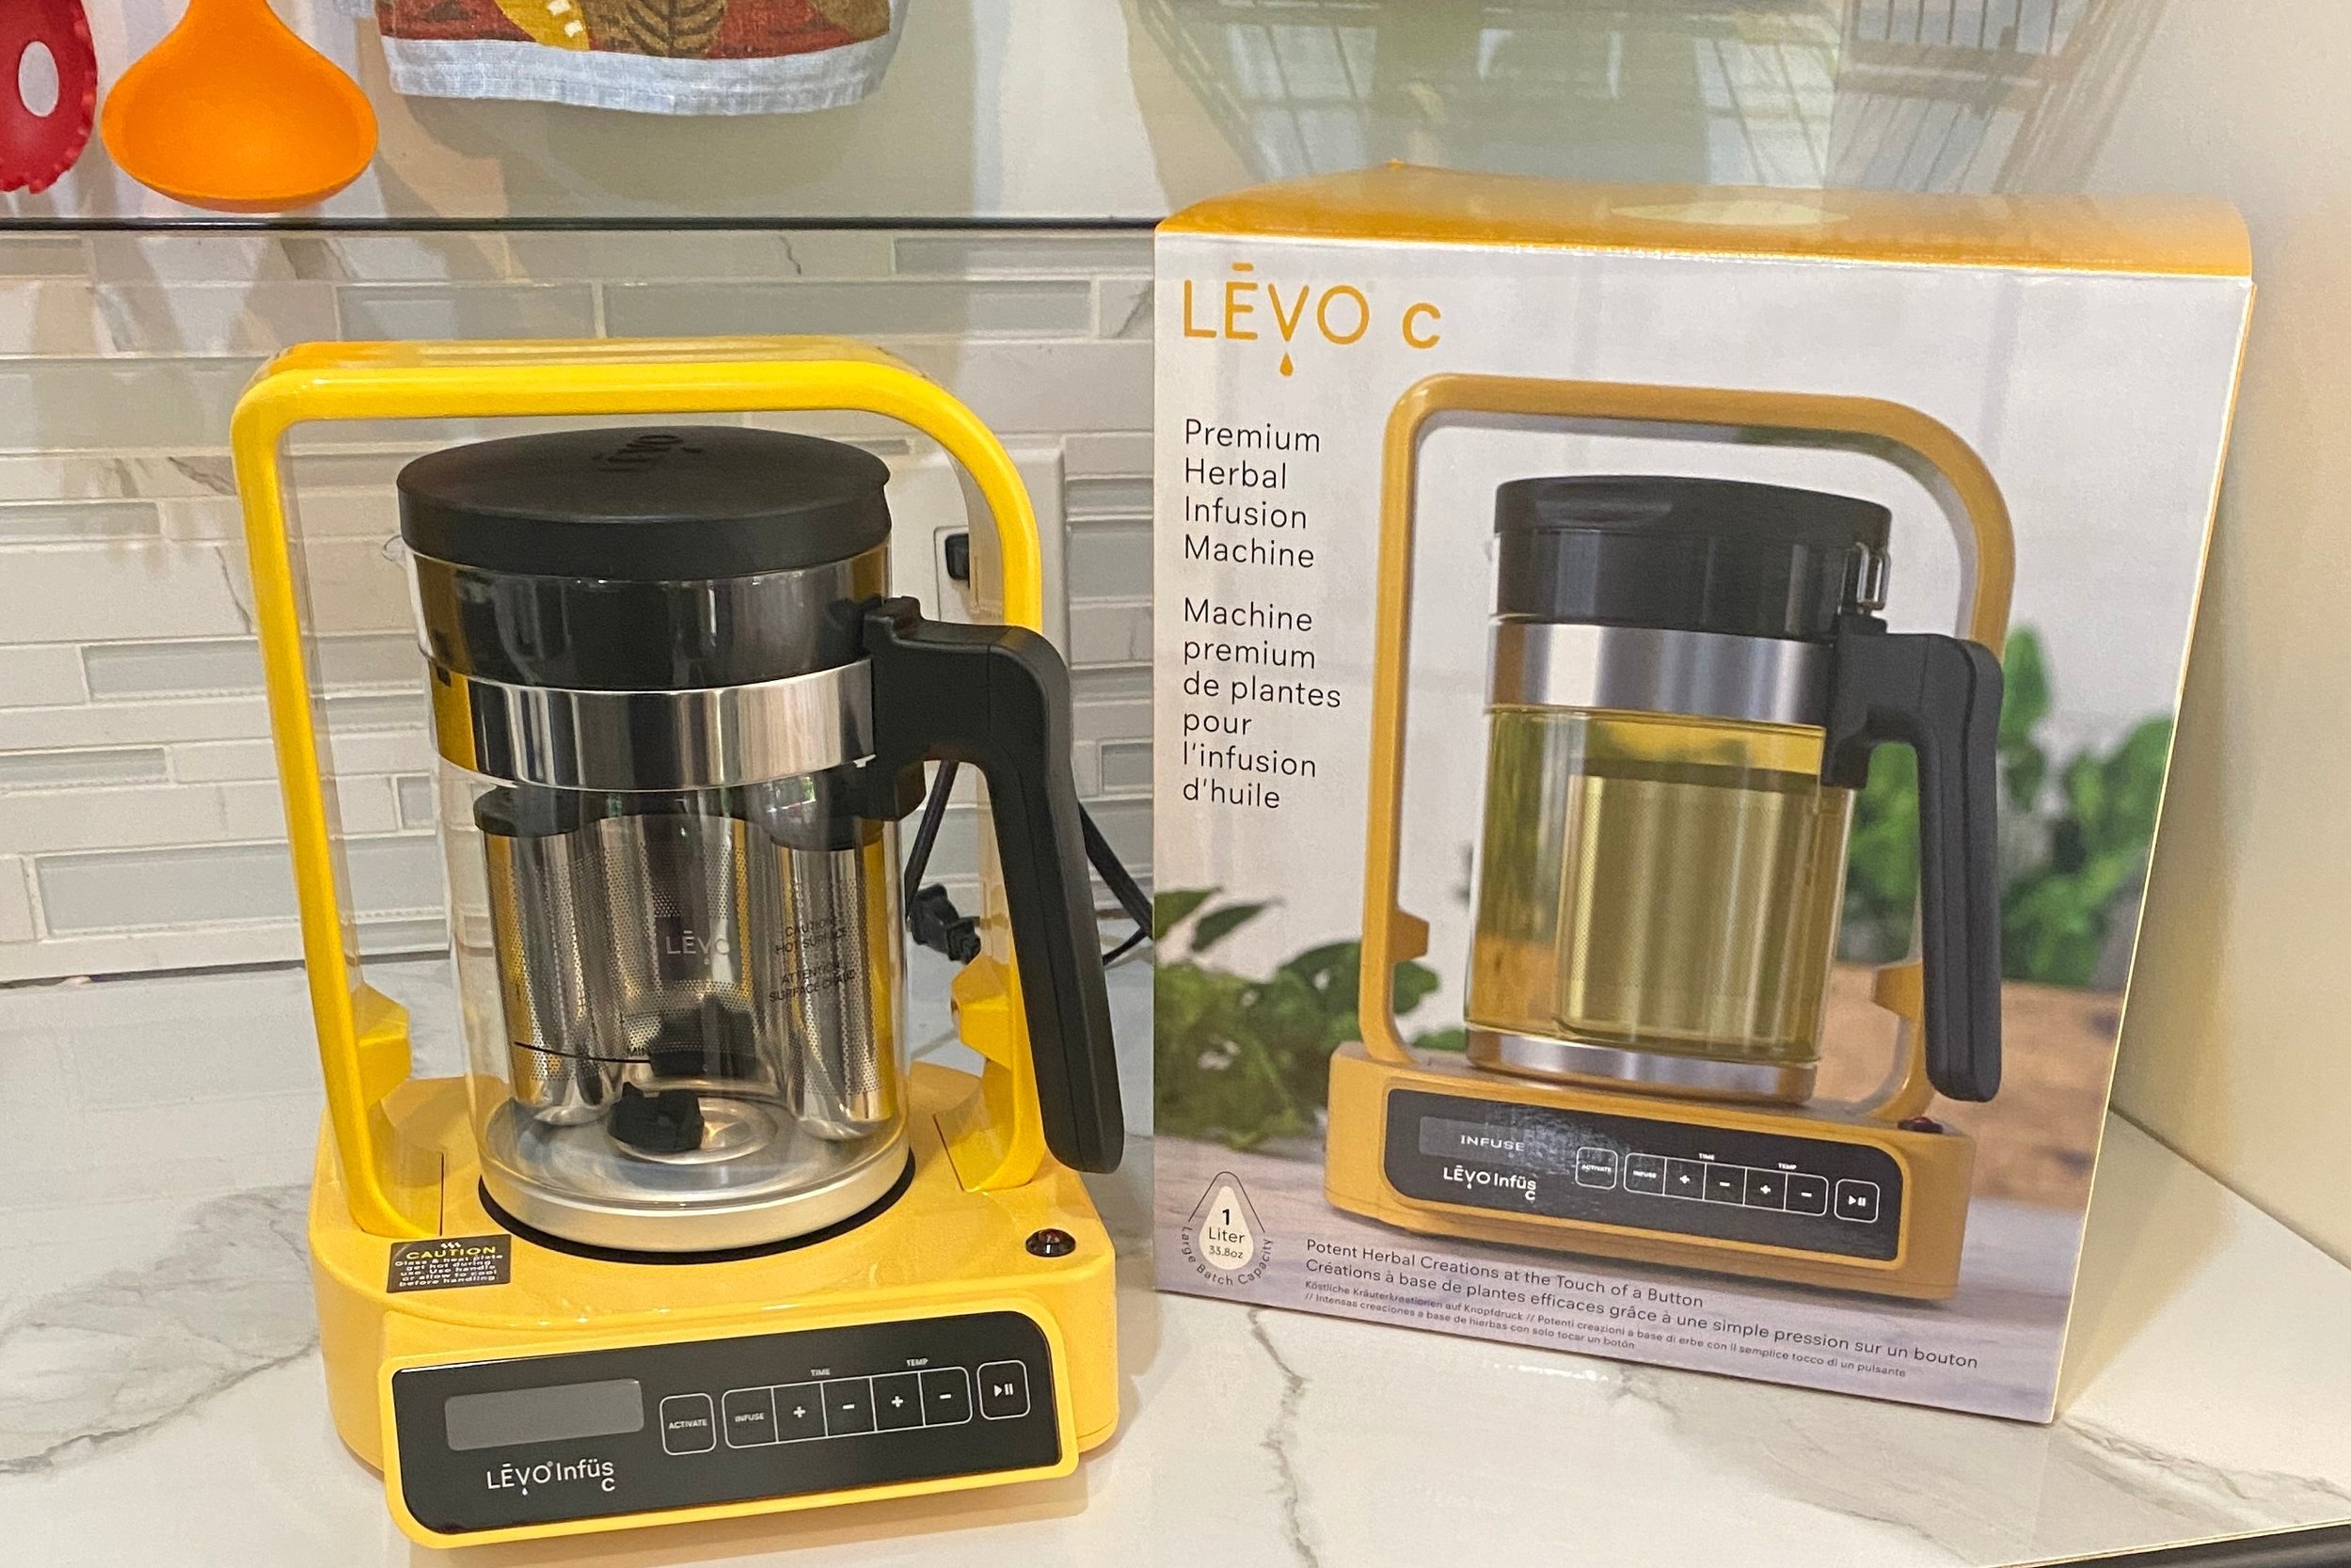 LEVO Gummy Candy Mixer Unboxing & Product Review 